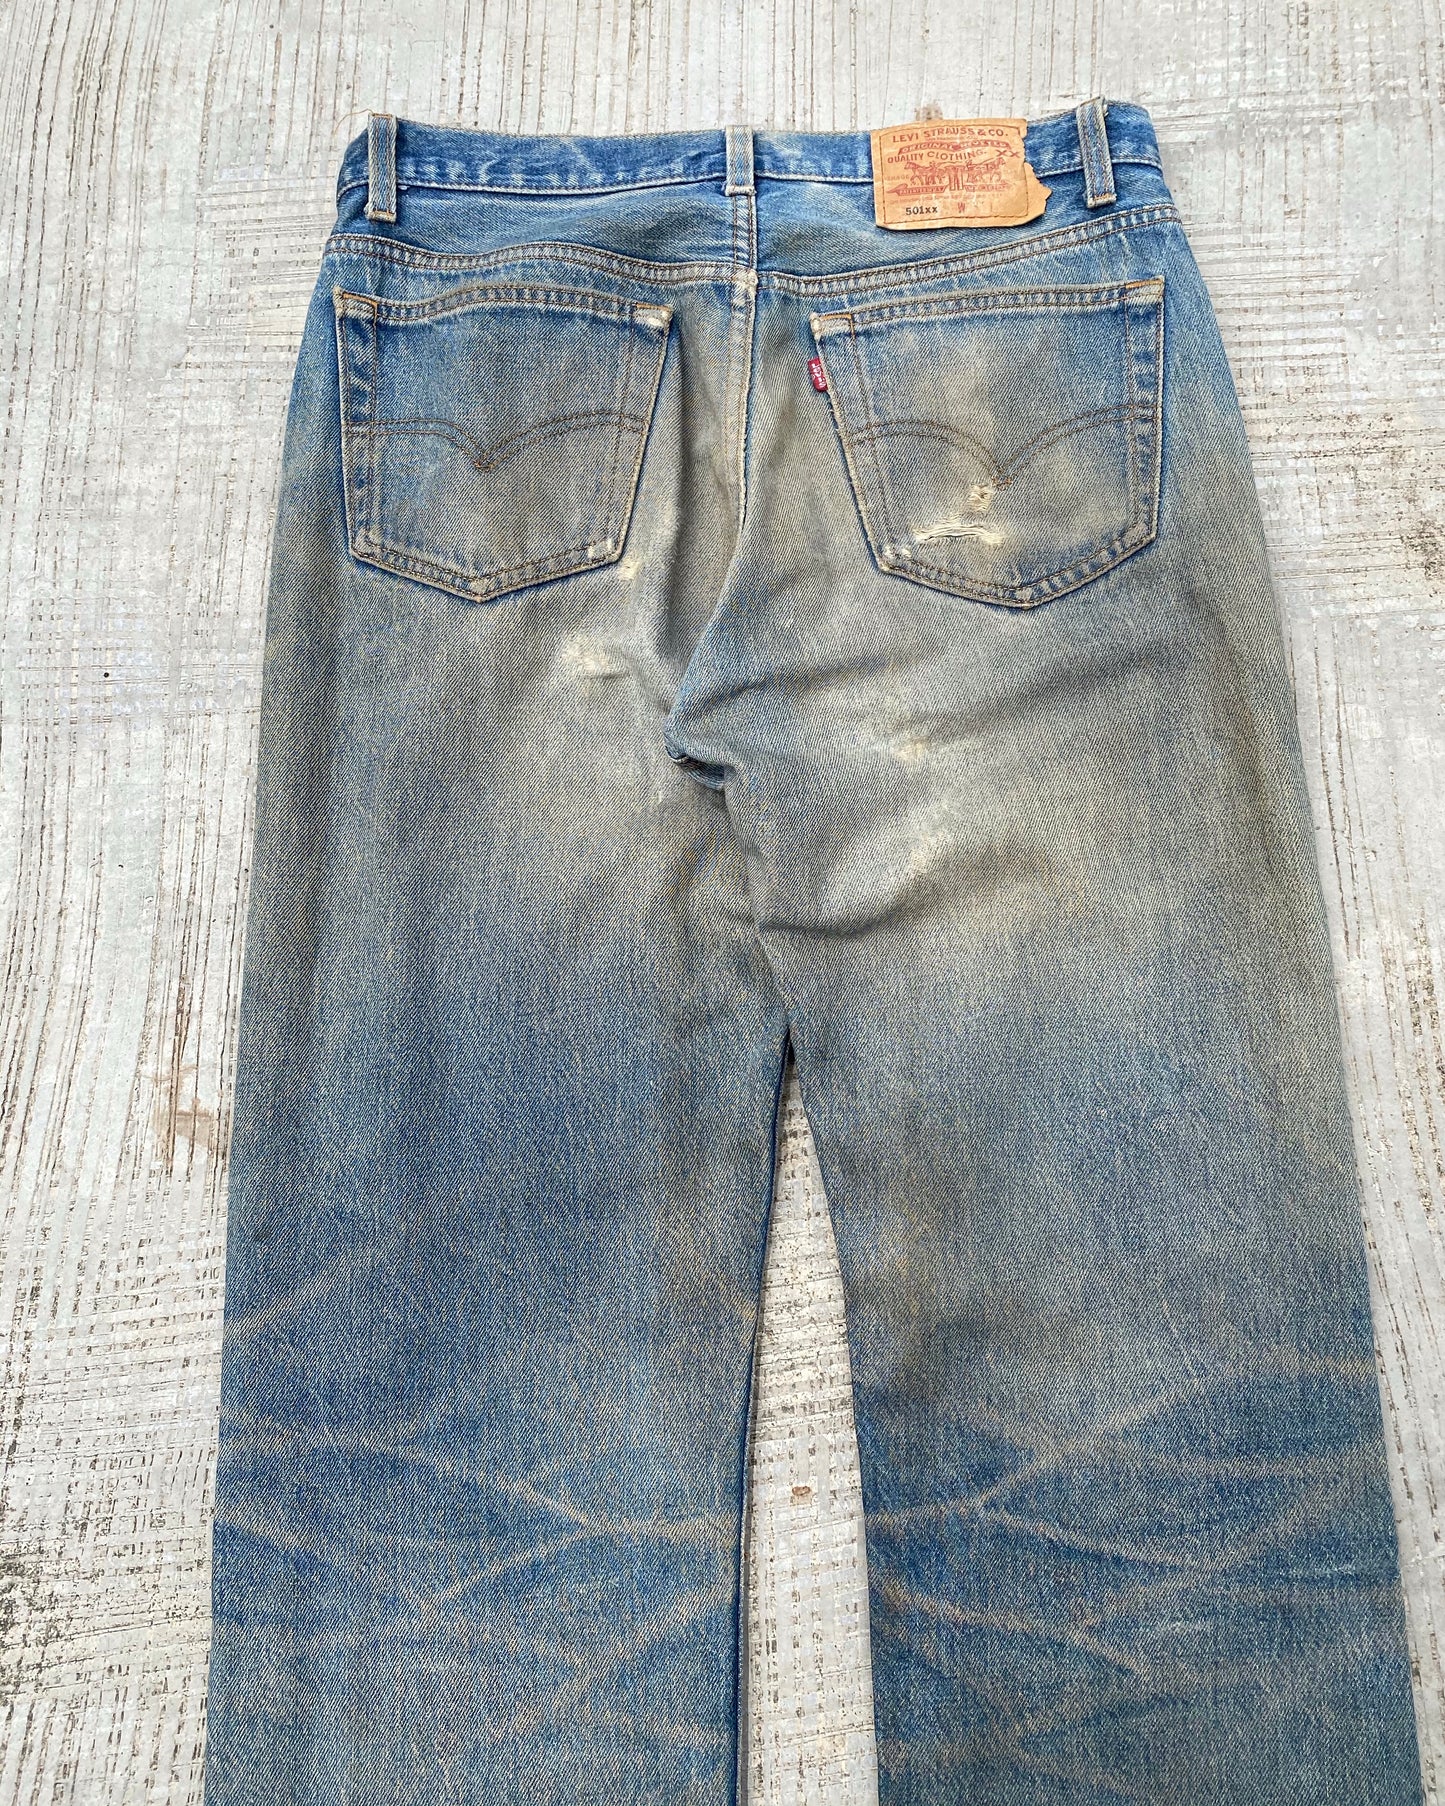 1990s Levi’s 501 Mud Washed Jeans